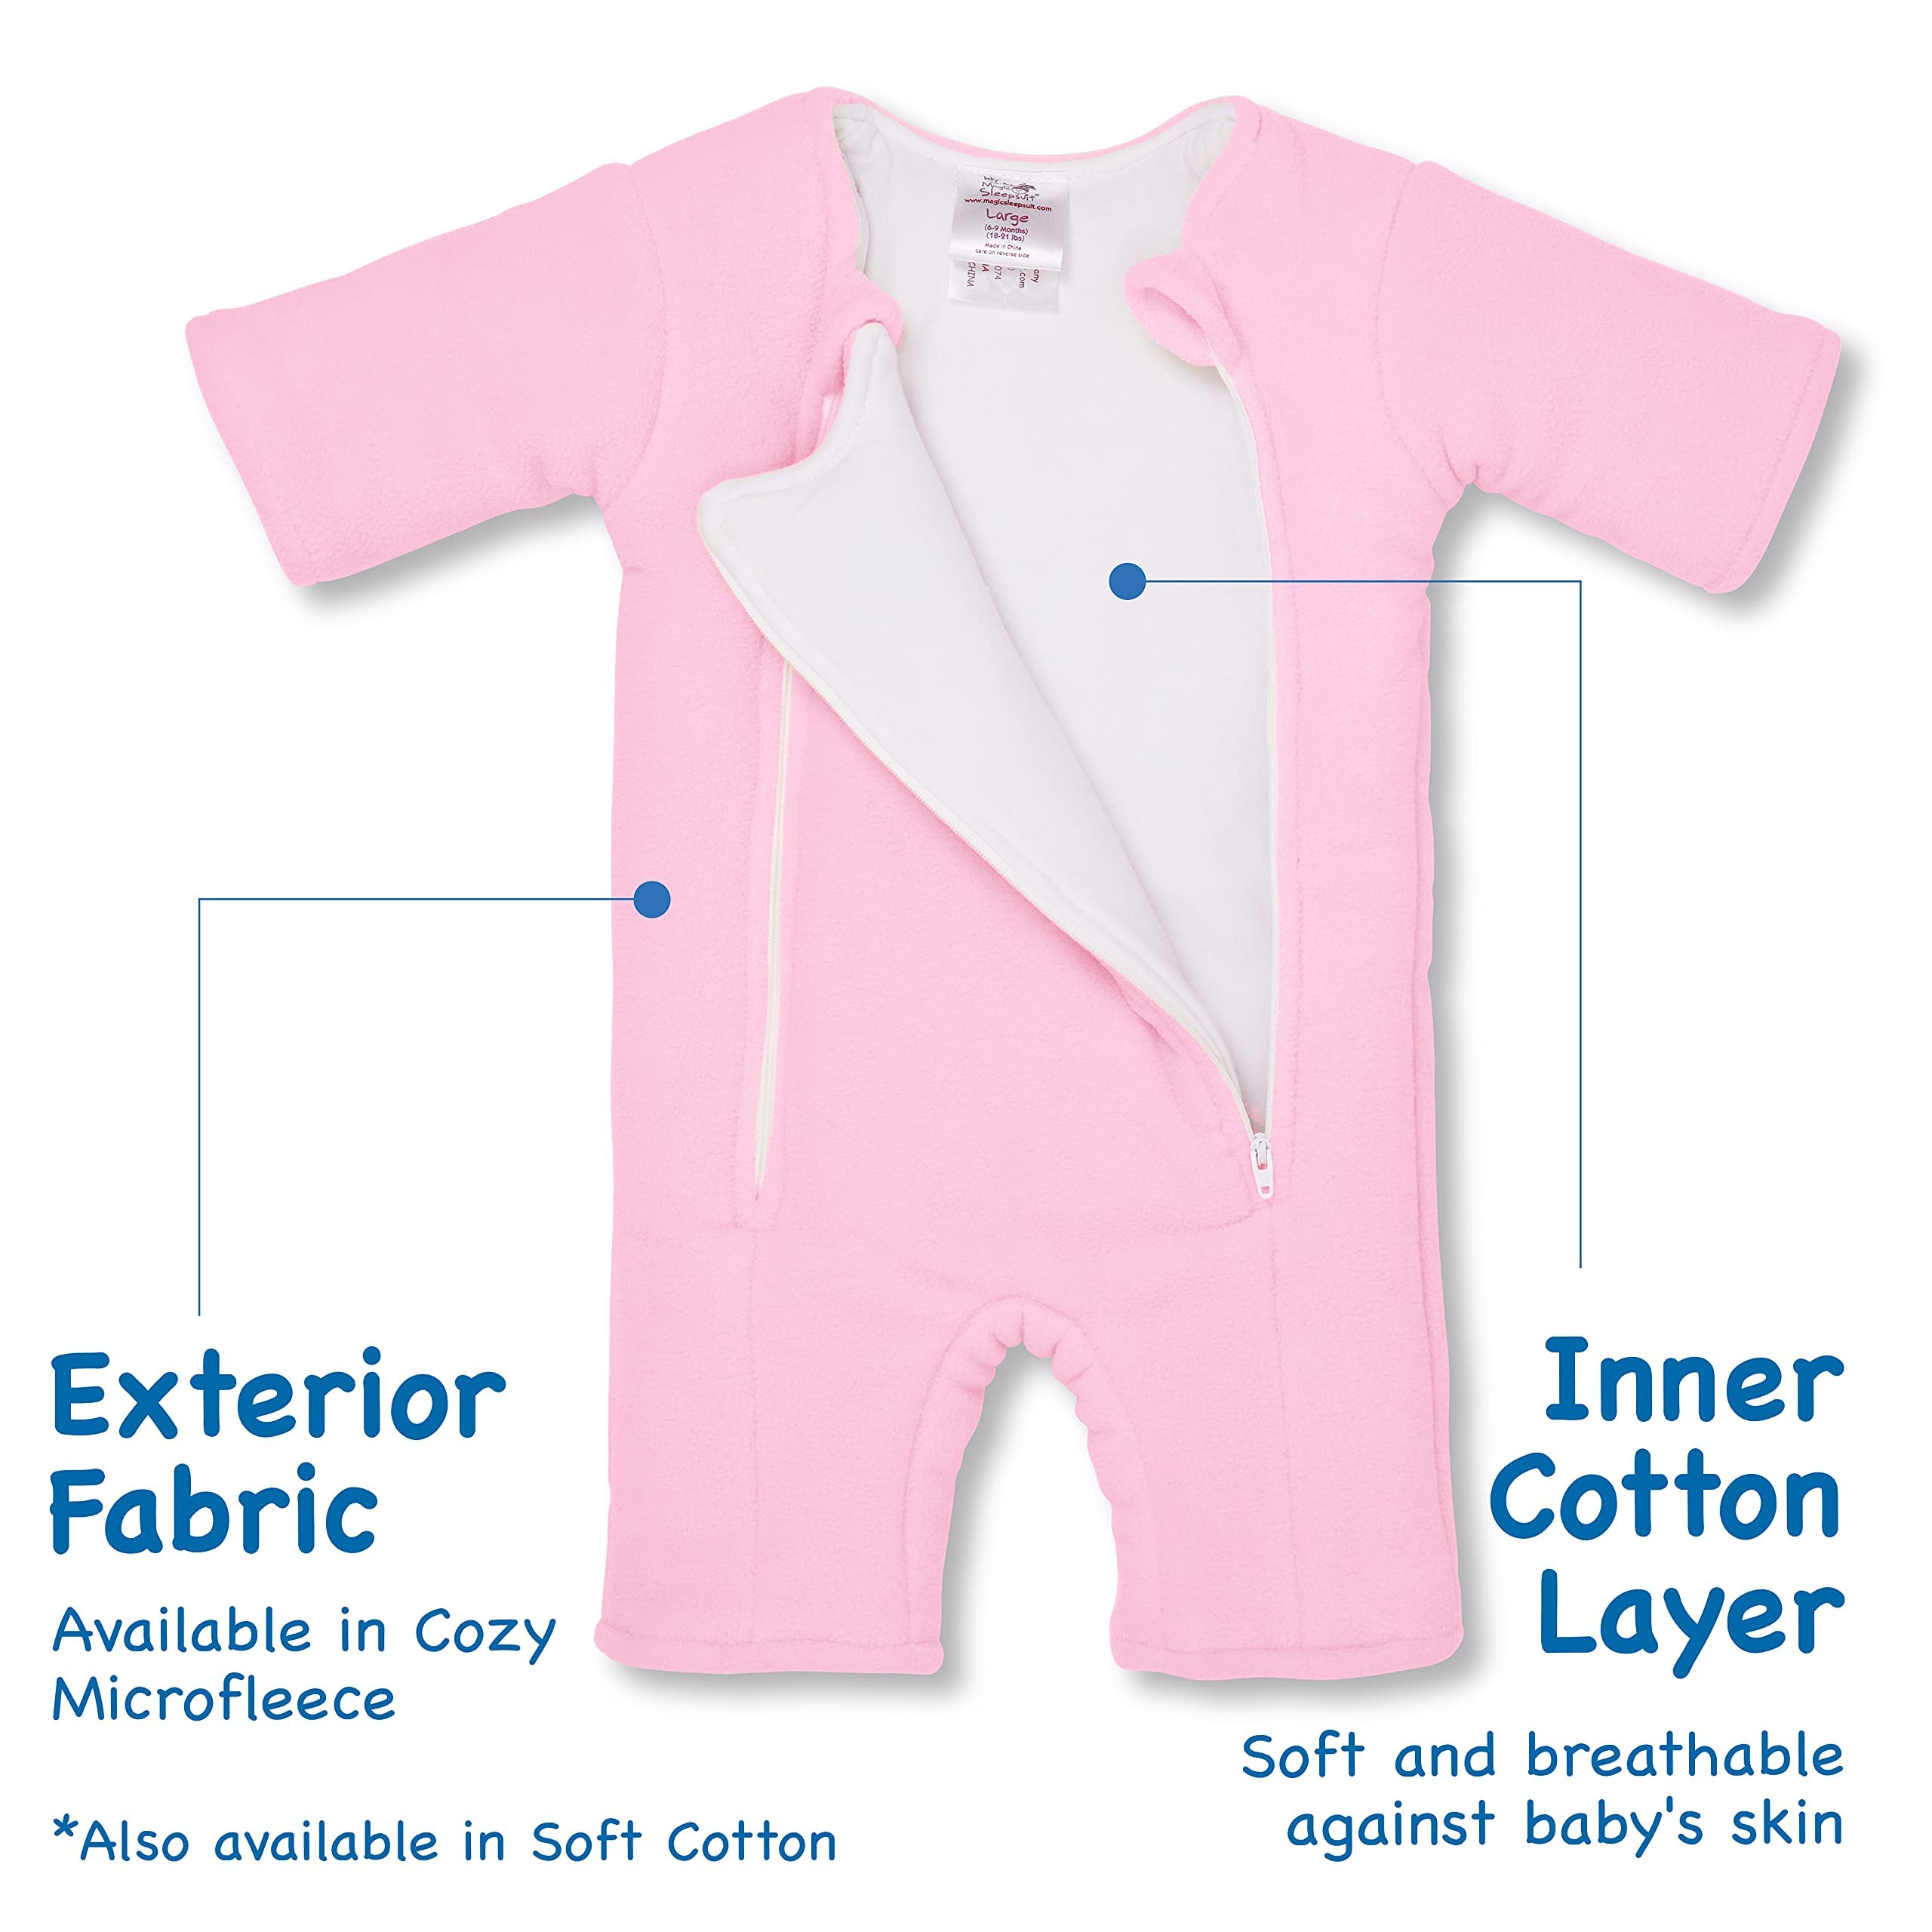 Baby Merlin's Magic Sleepsuit - Swaddle Transition Product - Microfleece